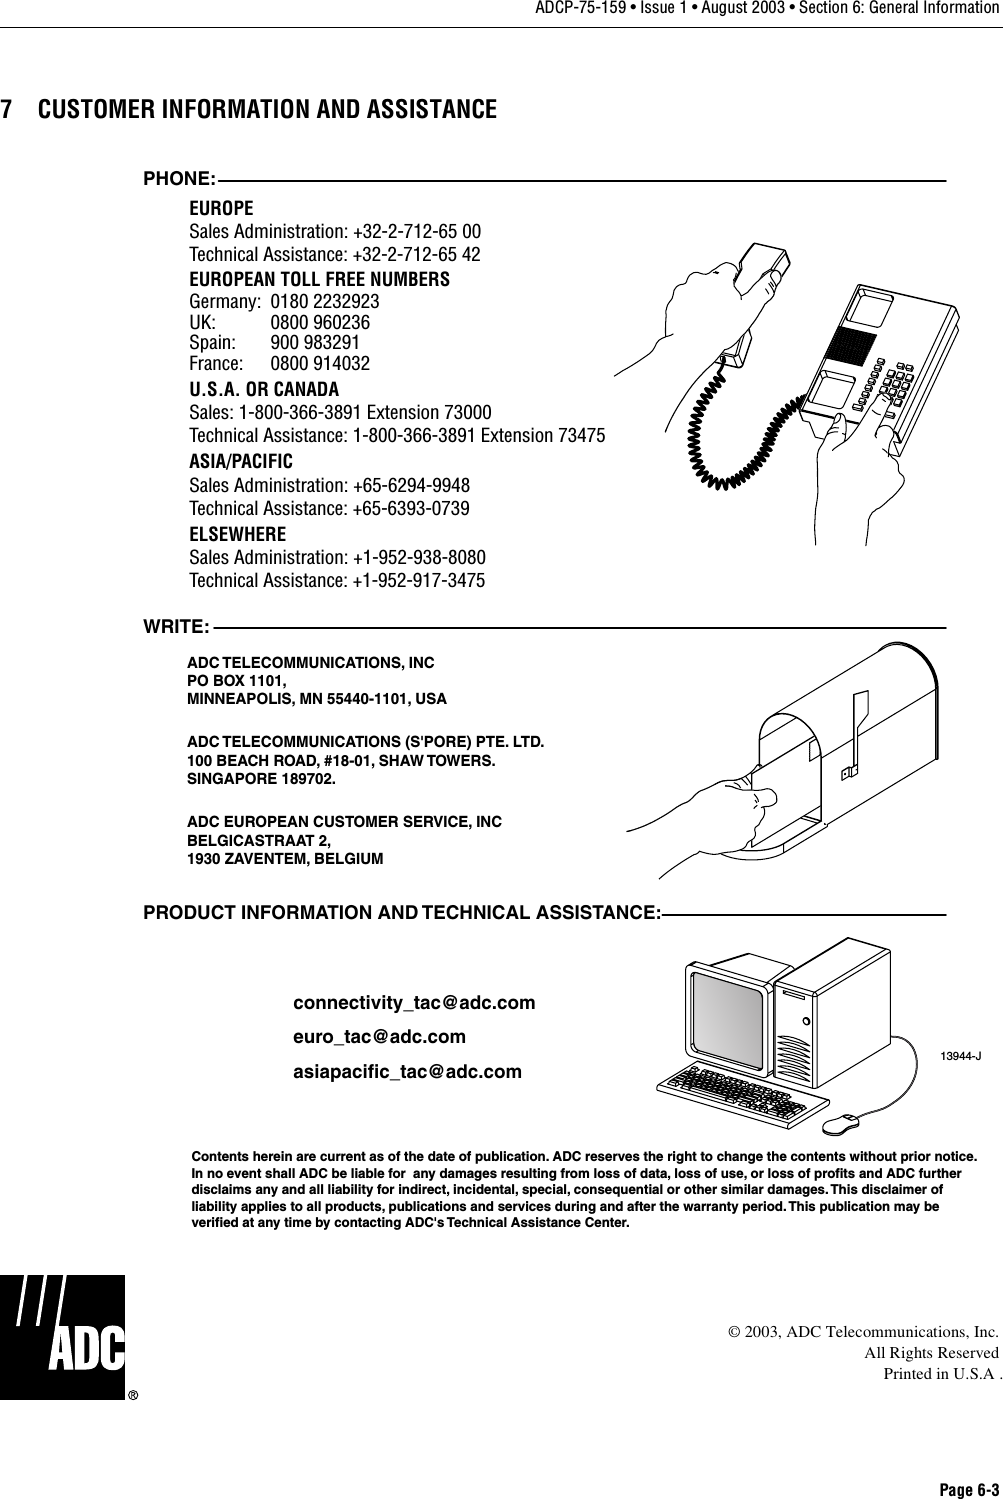 Page 6-3ADCP-75-159 • Issue 1 • August 2003 • Section 6: General Information7 CUSTOMER INFORMATION AND ASSISTANCE© 2003, ADC Telecommunications, Inc.All Rights ReservedPrinted in U.S.A .13944-JWRITE:ADC TELECOMMUNICATIONS, INCPO BOX 1101,MINNEAPOLIS, MN 55440-1101, USAADC TELECOMMUNICATIONS (S&apos;PORE) PTE. LTD.100 BEACH ROAD, #18-01, SHAW TOWERS.SINGAPORE 189702.ADC EUROPEAN CUSTOMER SERVICE, INCBELGICASTRAAT 2,1930 ZAVENTEM, BELGIUMPHONE:EUROPESales Administration: +32-2-712-65 00Technical Assistance: +32-2-712-65 42EUROPEAN TOLL FREE NUMBERSUK: 0800 960236Spain: 900 983291France: 0800 914032Germany: 0180 2232923U.S.A. OR CANADASales: 1-800-366-3891 Extension 73000Technical Assistance: 1-800-366-3891 Extension 73475ASIA/PACIFICSales Administration: +65-6294-9948Technical Assistance: +65-6393-0739ELSEWHERESales Administration: +1-952-938-8080Technical Assistance: +1-952-917-3475PRODUCT INFORMATION AND TECHNICAL ASSISTANCE:Contents herein are current as of the date of publication. ADC reserves the right to change the contents without prior notice.In no event shall ADC be liable for  any damages resulting from loss of data, loss of use, or loss of profits and ADC furtherdisclaims any and all liability for indirect, incidental, special, consequential or other similar damages. This disclaimer ofliability applies to all products, publications and services during and after the warranty period. This publication may beverified at any time by contacting ADC&apos;s Technical Assistance Center. euro_tac@adc.comasiapacific_tac@adc.comconnectivity_tac@adc.com